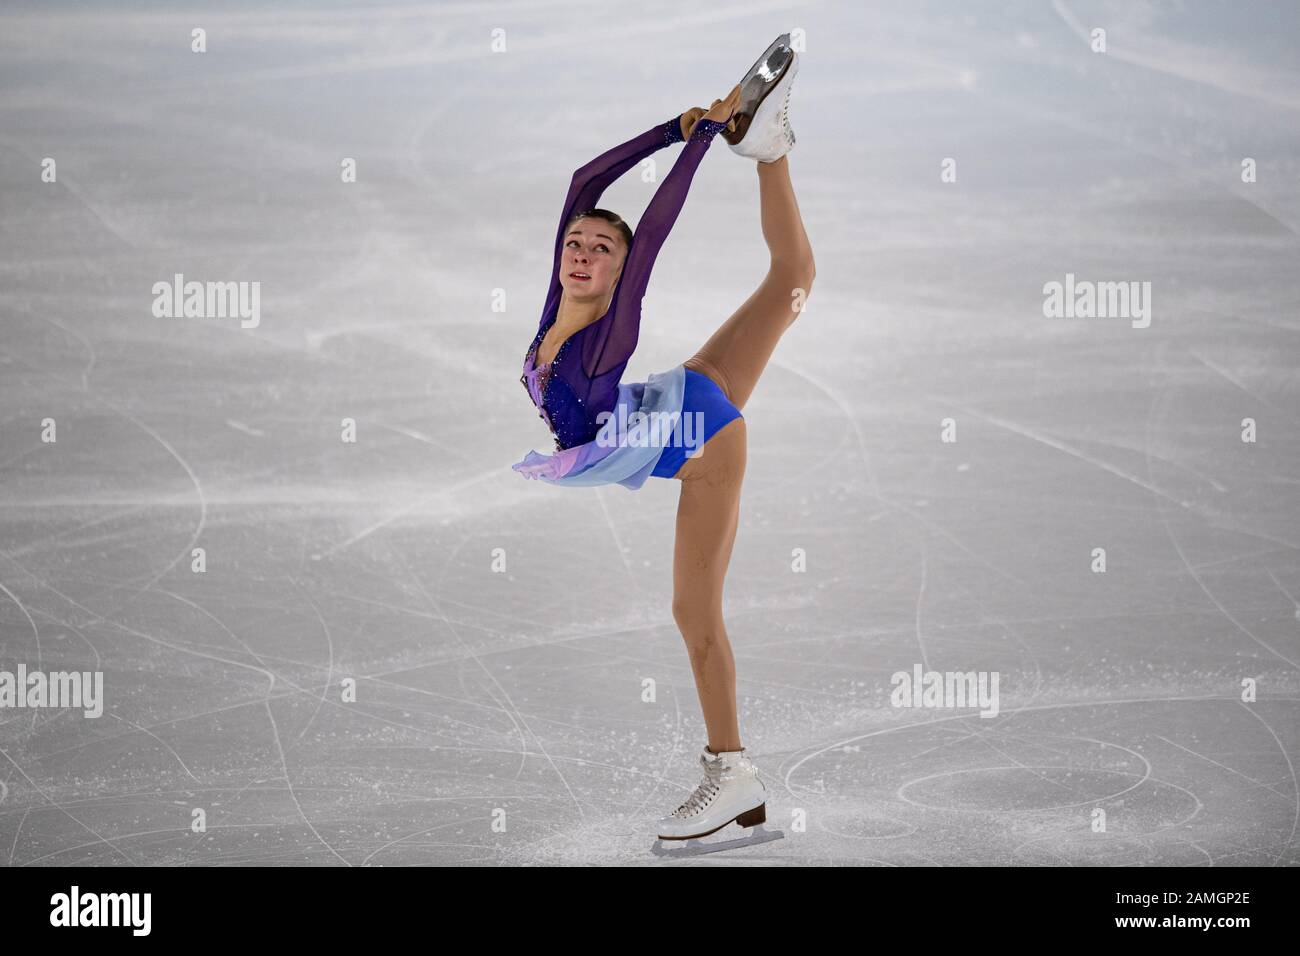 Lausanne, Switzerland. 13th, Jan 2020 FROLOVA Anna (RUS) competes in Figure Skating Women Free Dance during the Lausanne 2020 Youth Olympic Games at Vaudoise Arena on Monday, 13 January 2020. Lausanne, Switzerland. Credit: Taka G Wu/Alamy Live News Stock Photo